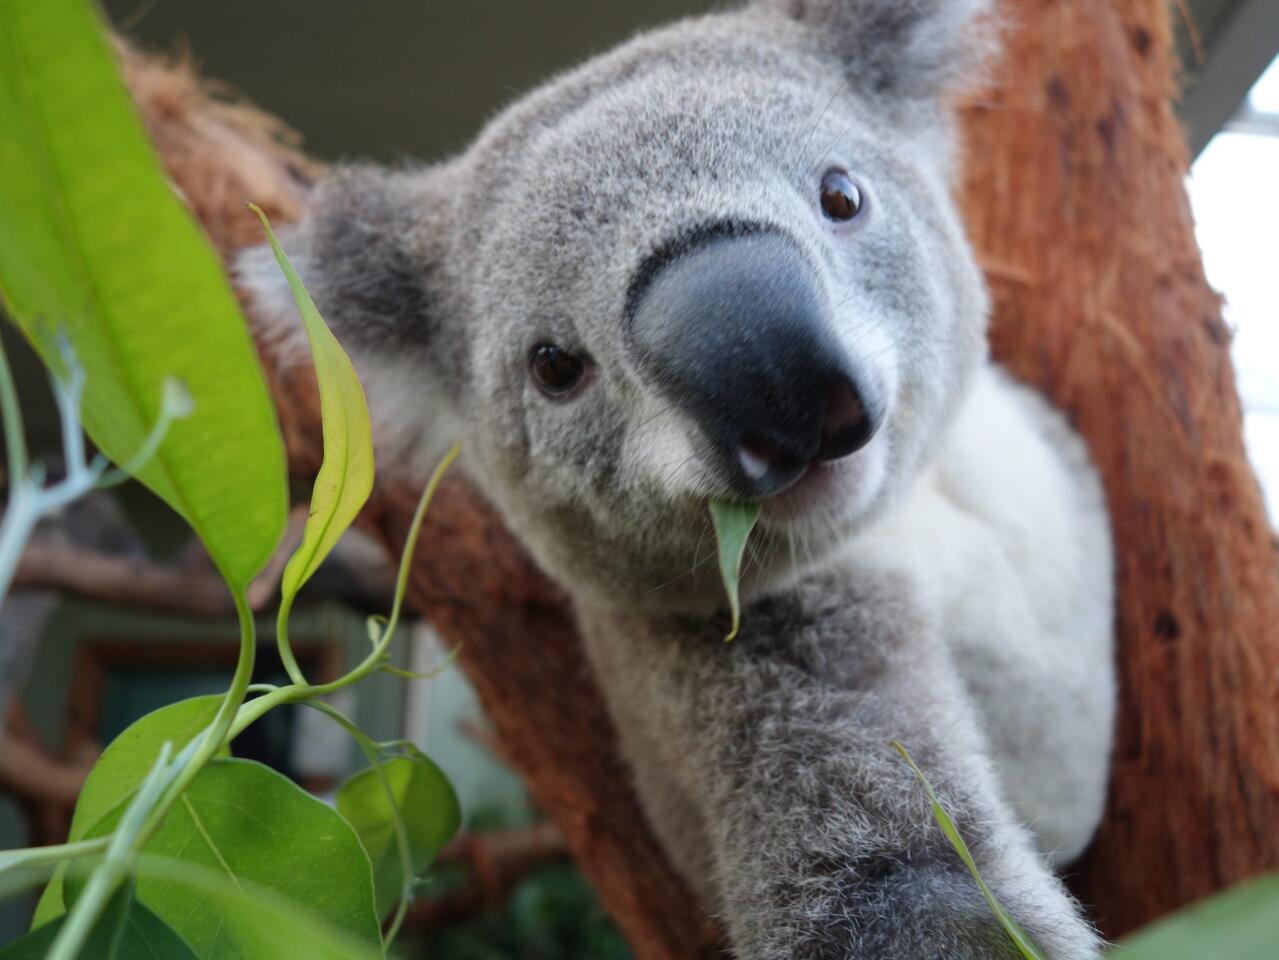 Koalas are able to produce a mating call that is so low-pitched it ought to come from a creature the size of an elephant. Now scientists have figured out how they do it.